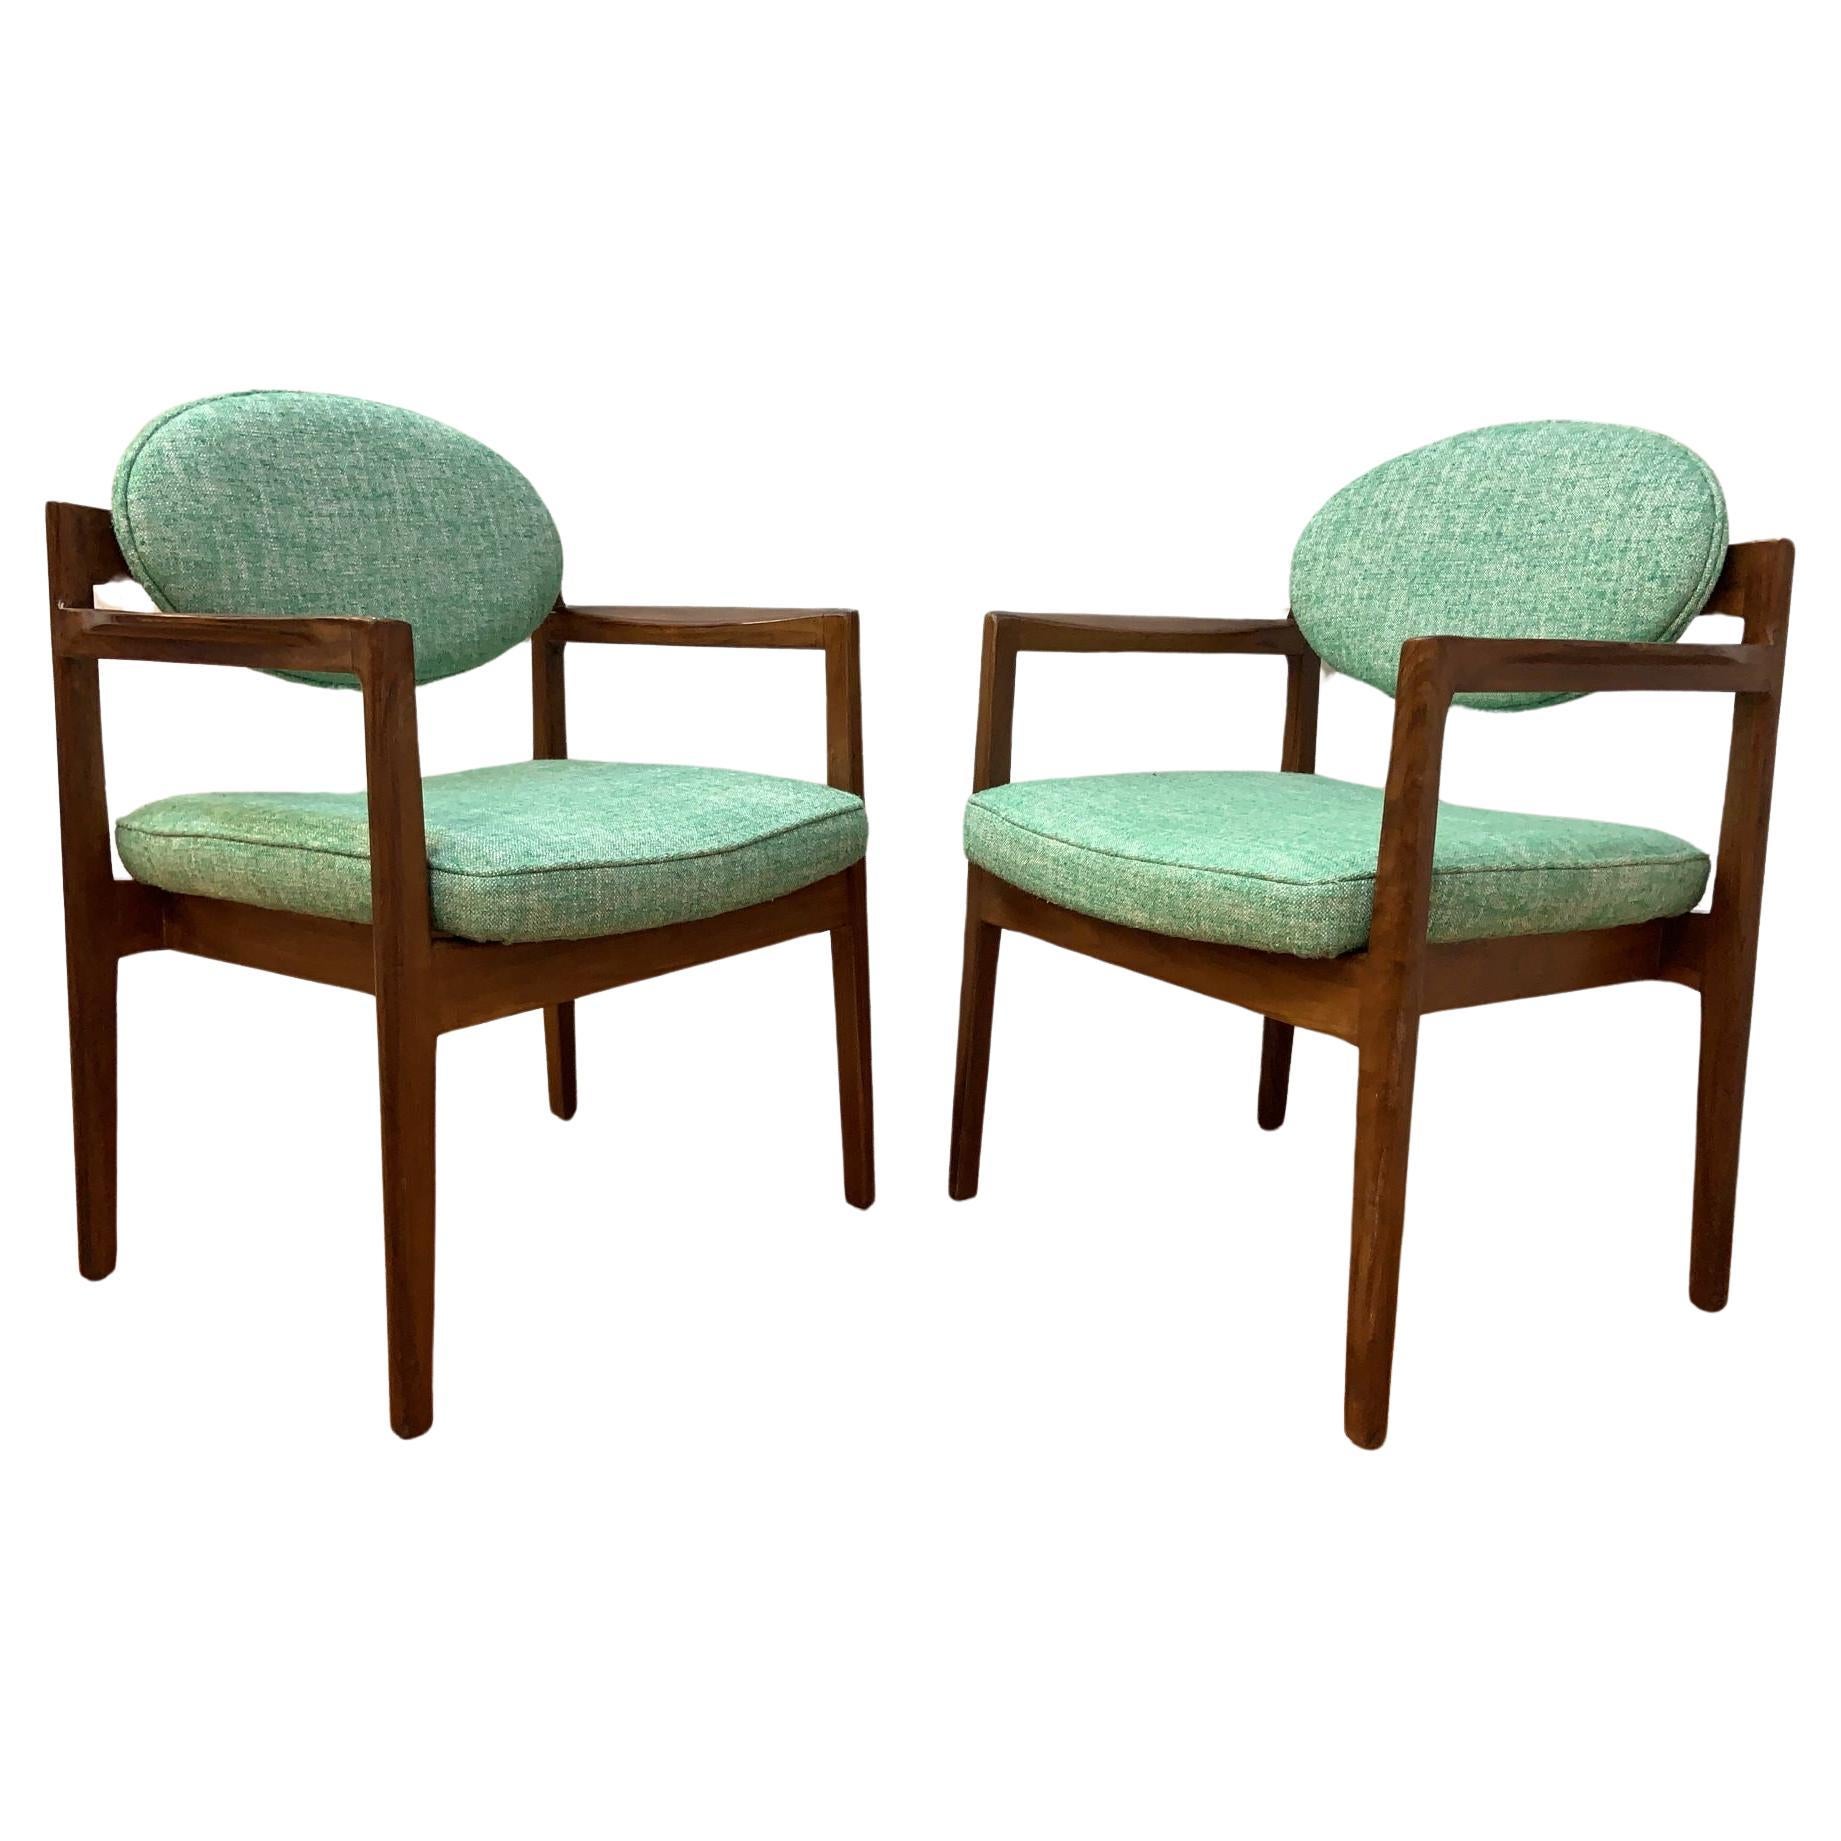 Mid Century Modern Oval-Back Armchairs by Jens Risom Newly Reupholstered - Pair For Sale